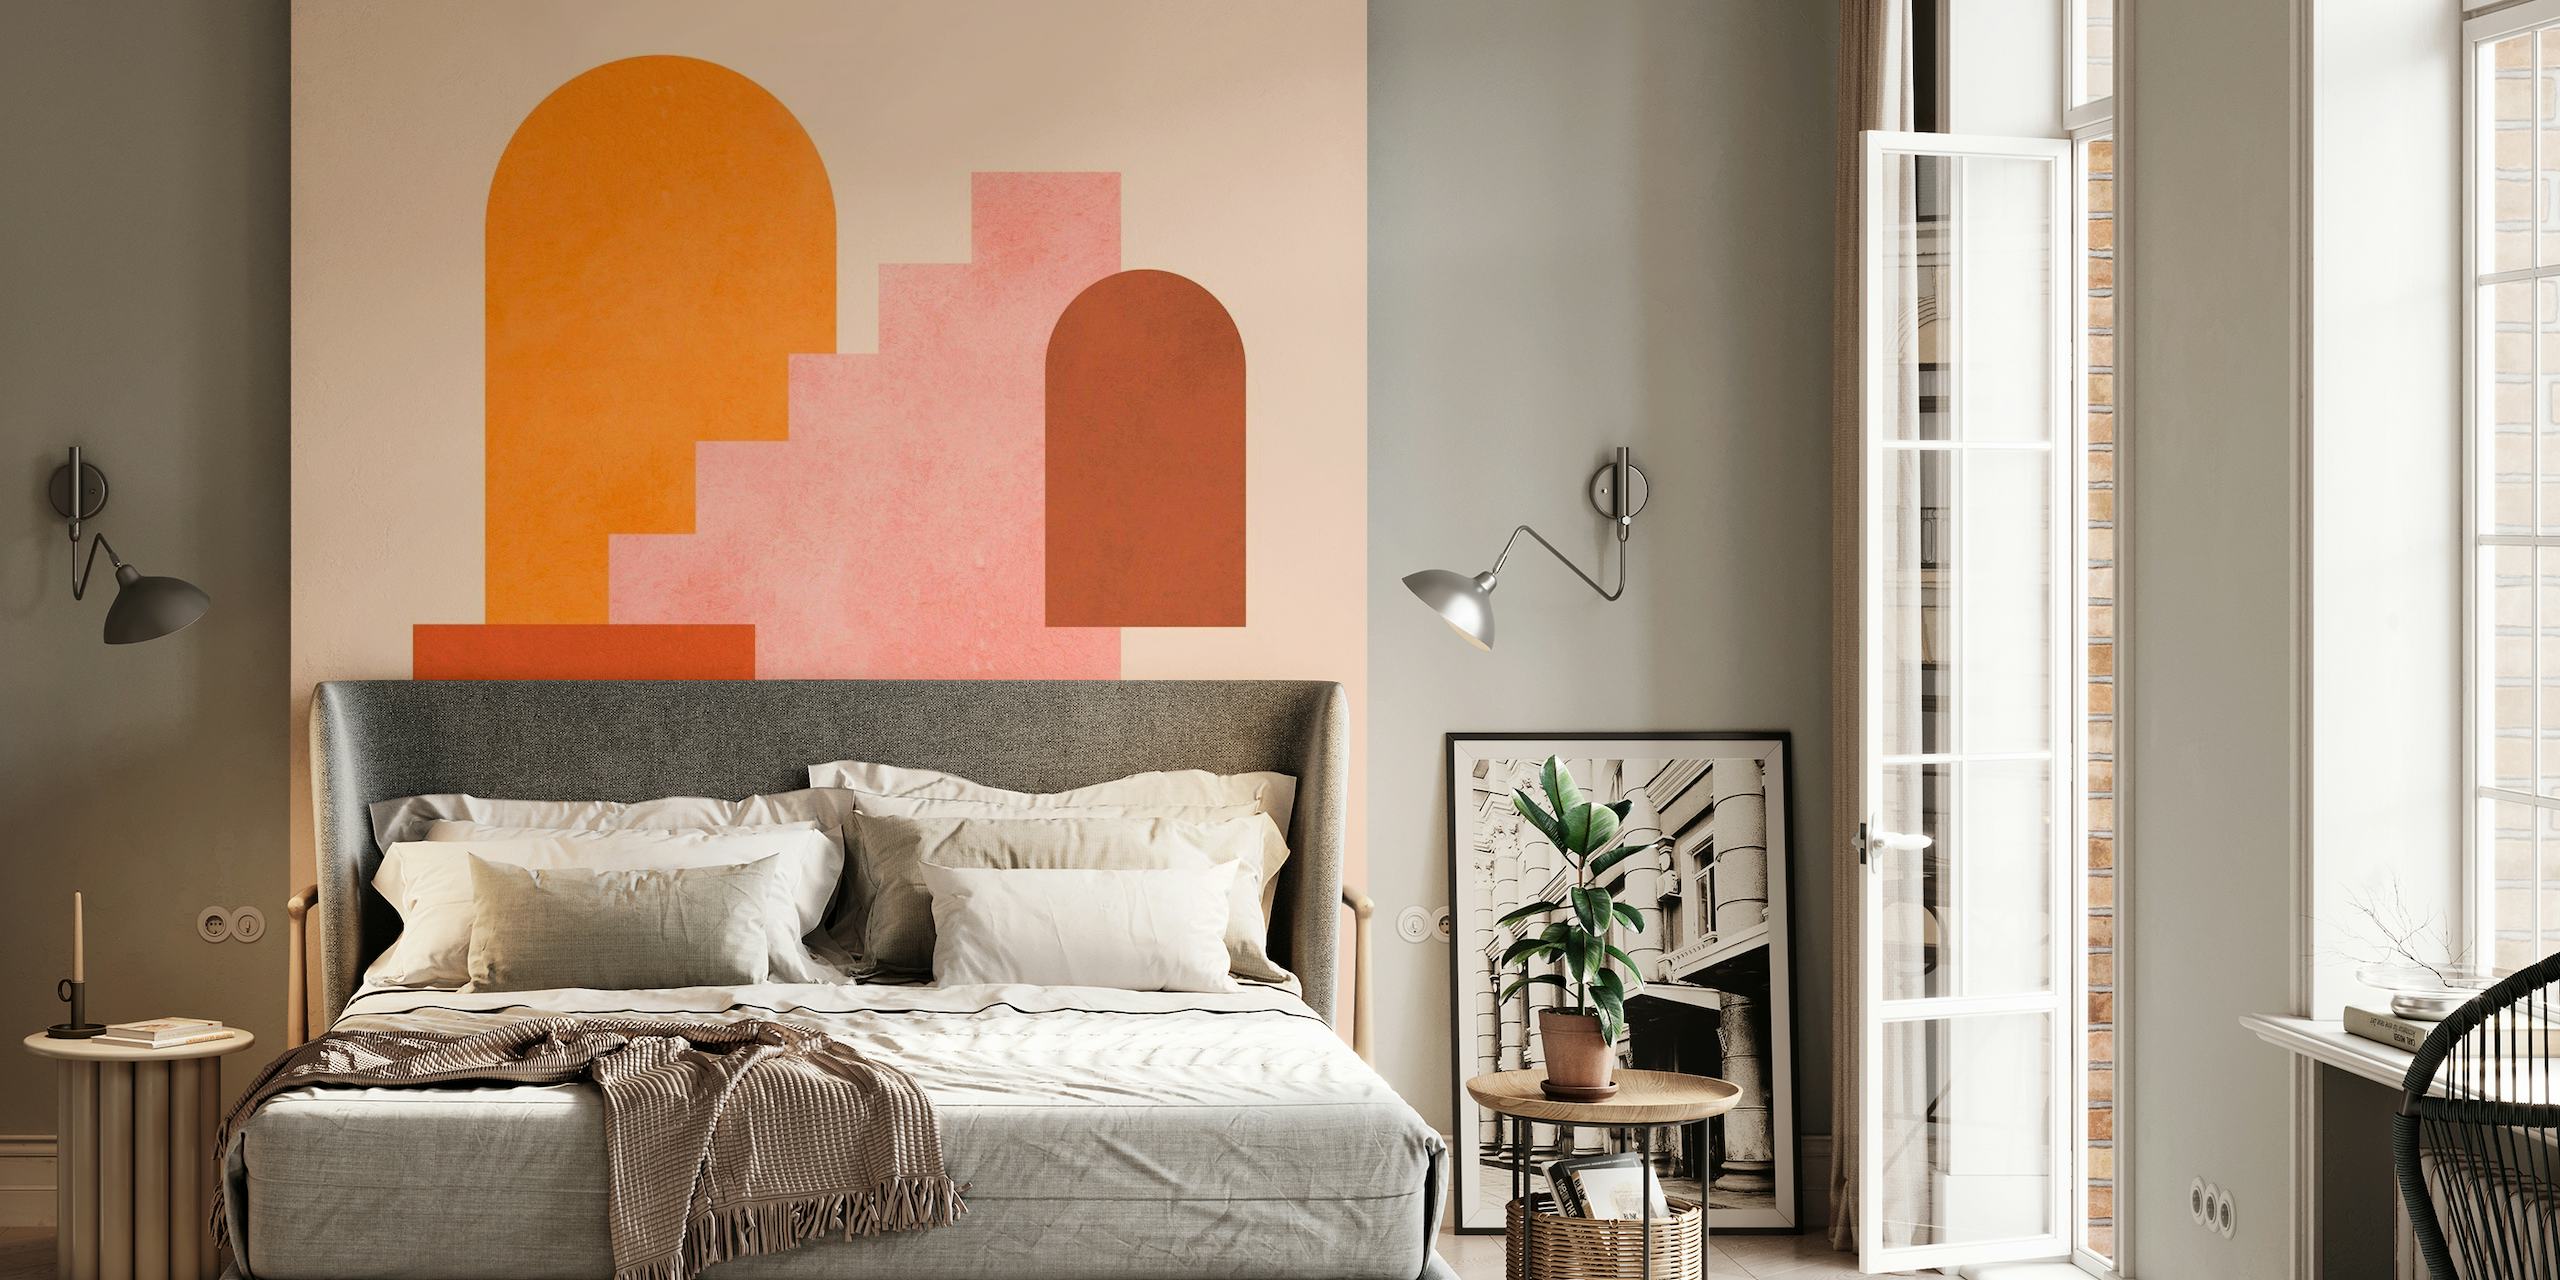 Abstract geometric shapes wall mural featuring orange, pink, and terracotta tones.